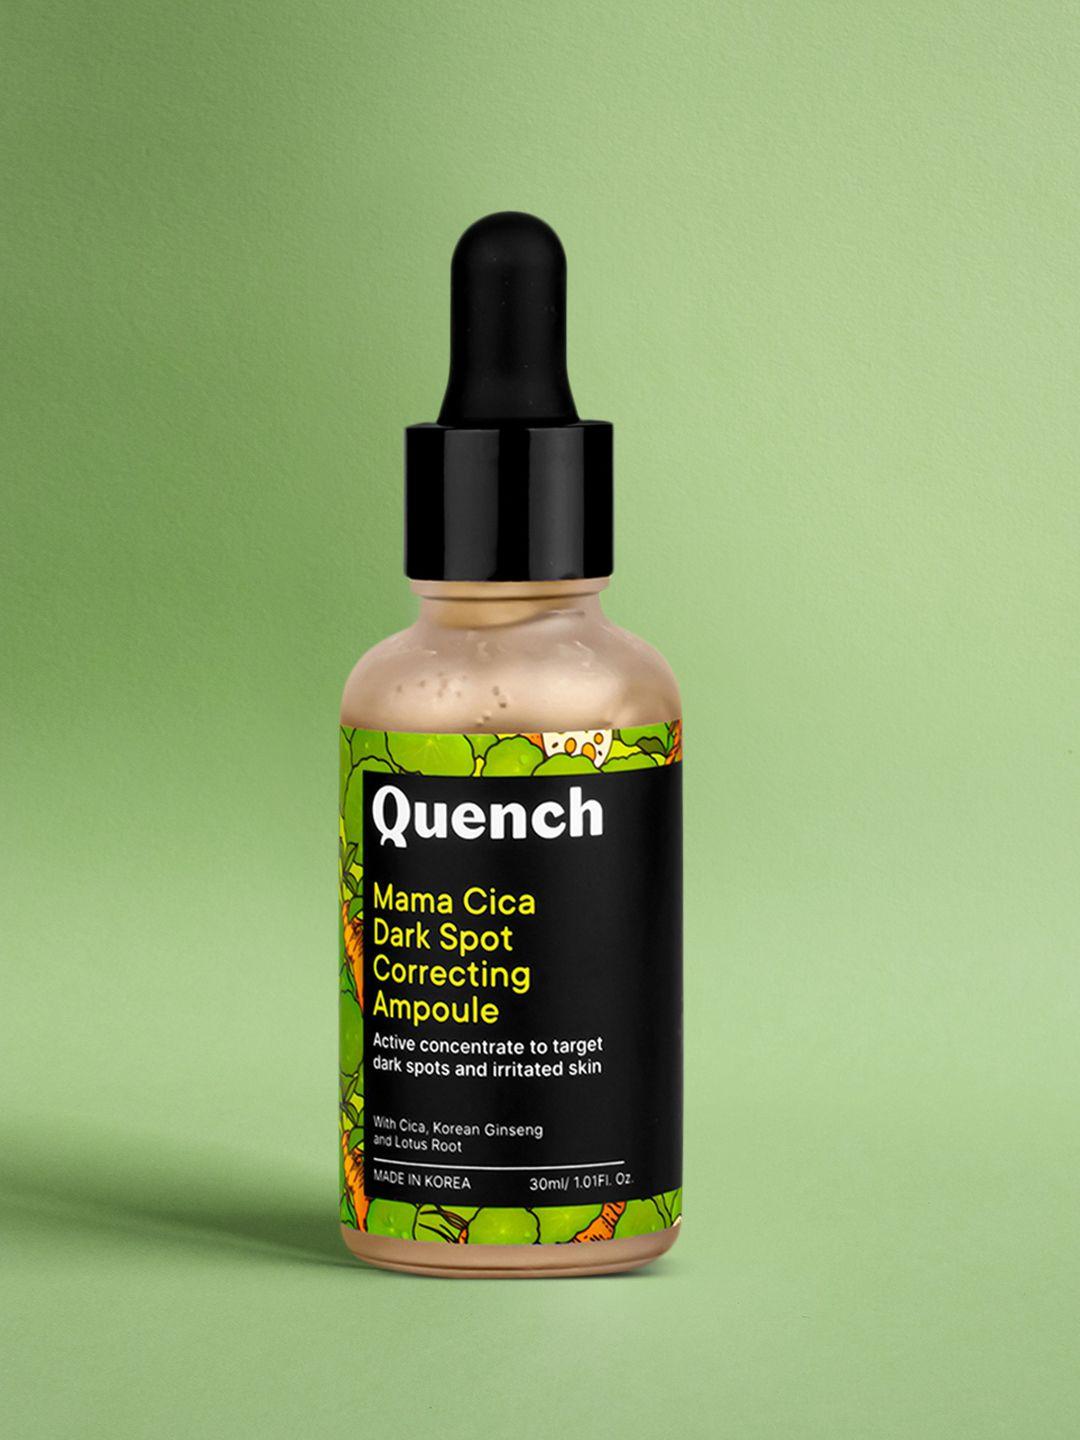 quench-botanics-mama-cica-dark-spot-correcting-ampoule-with-korean-ginseng-30-ml